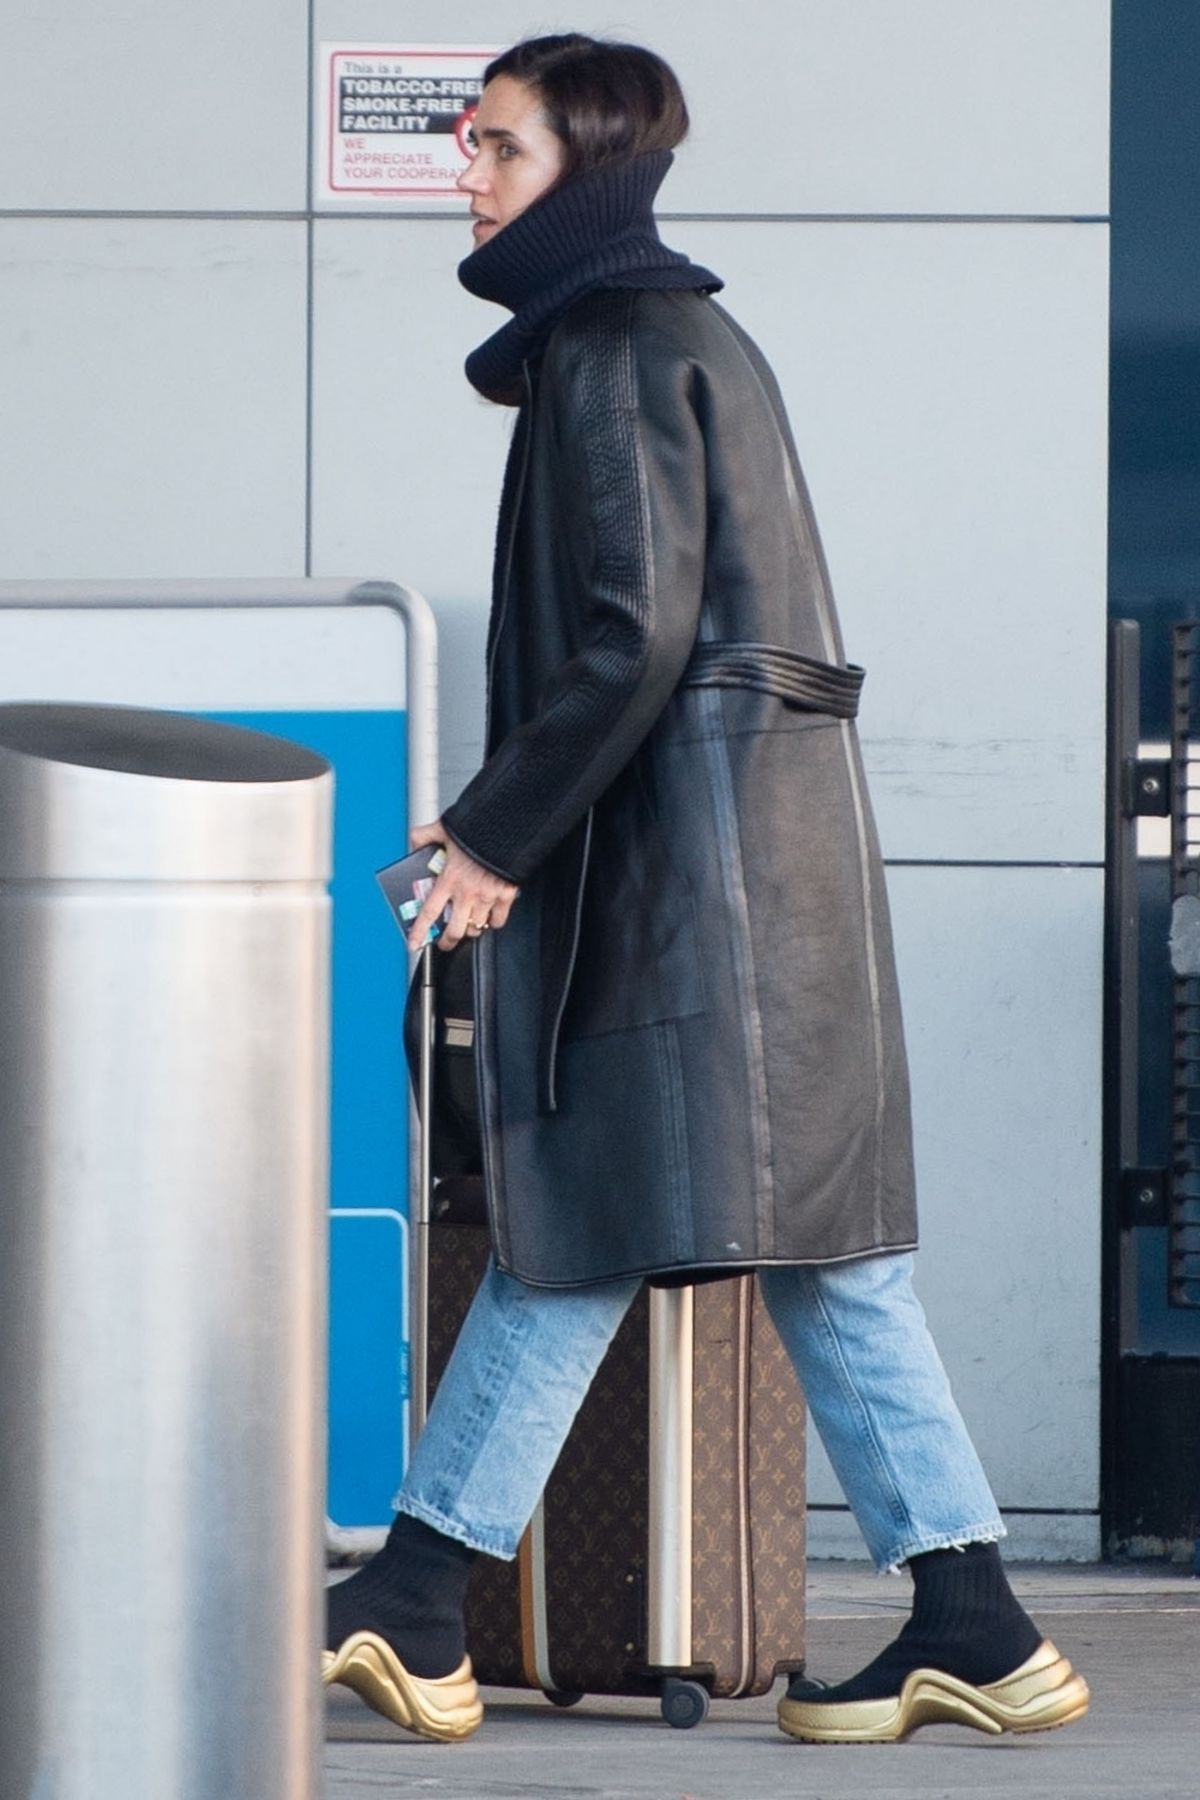 JENNIFER CONNELLY at Airport in Vancouver 04/02/2022 – HawtCelebs